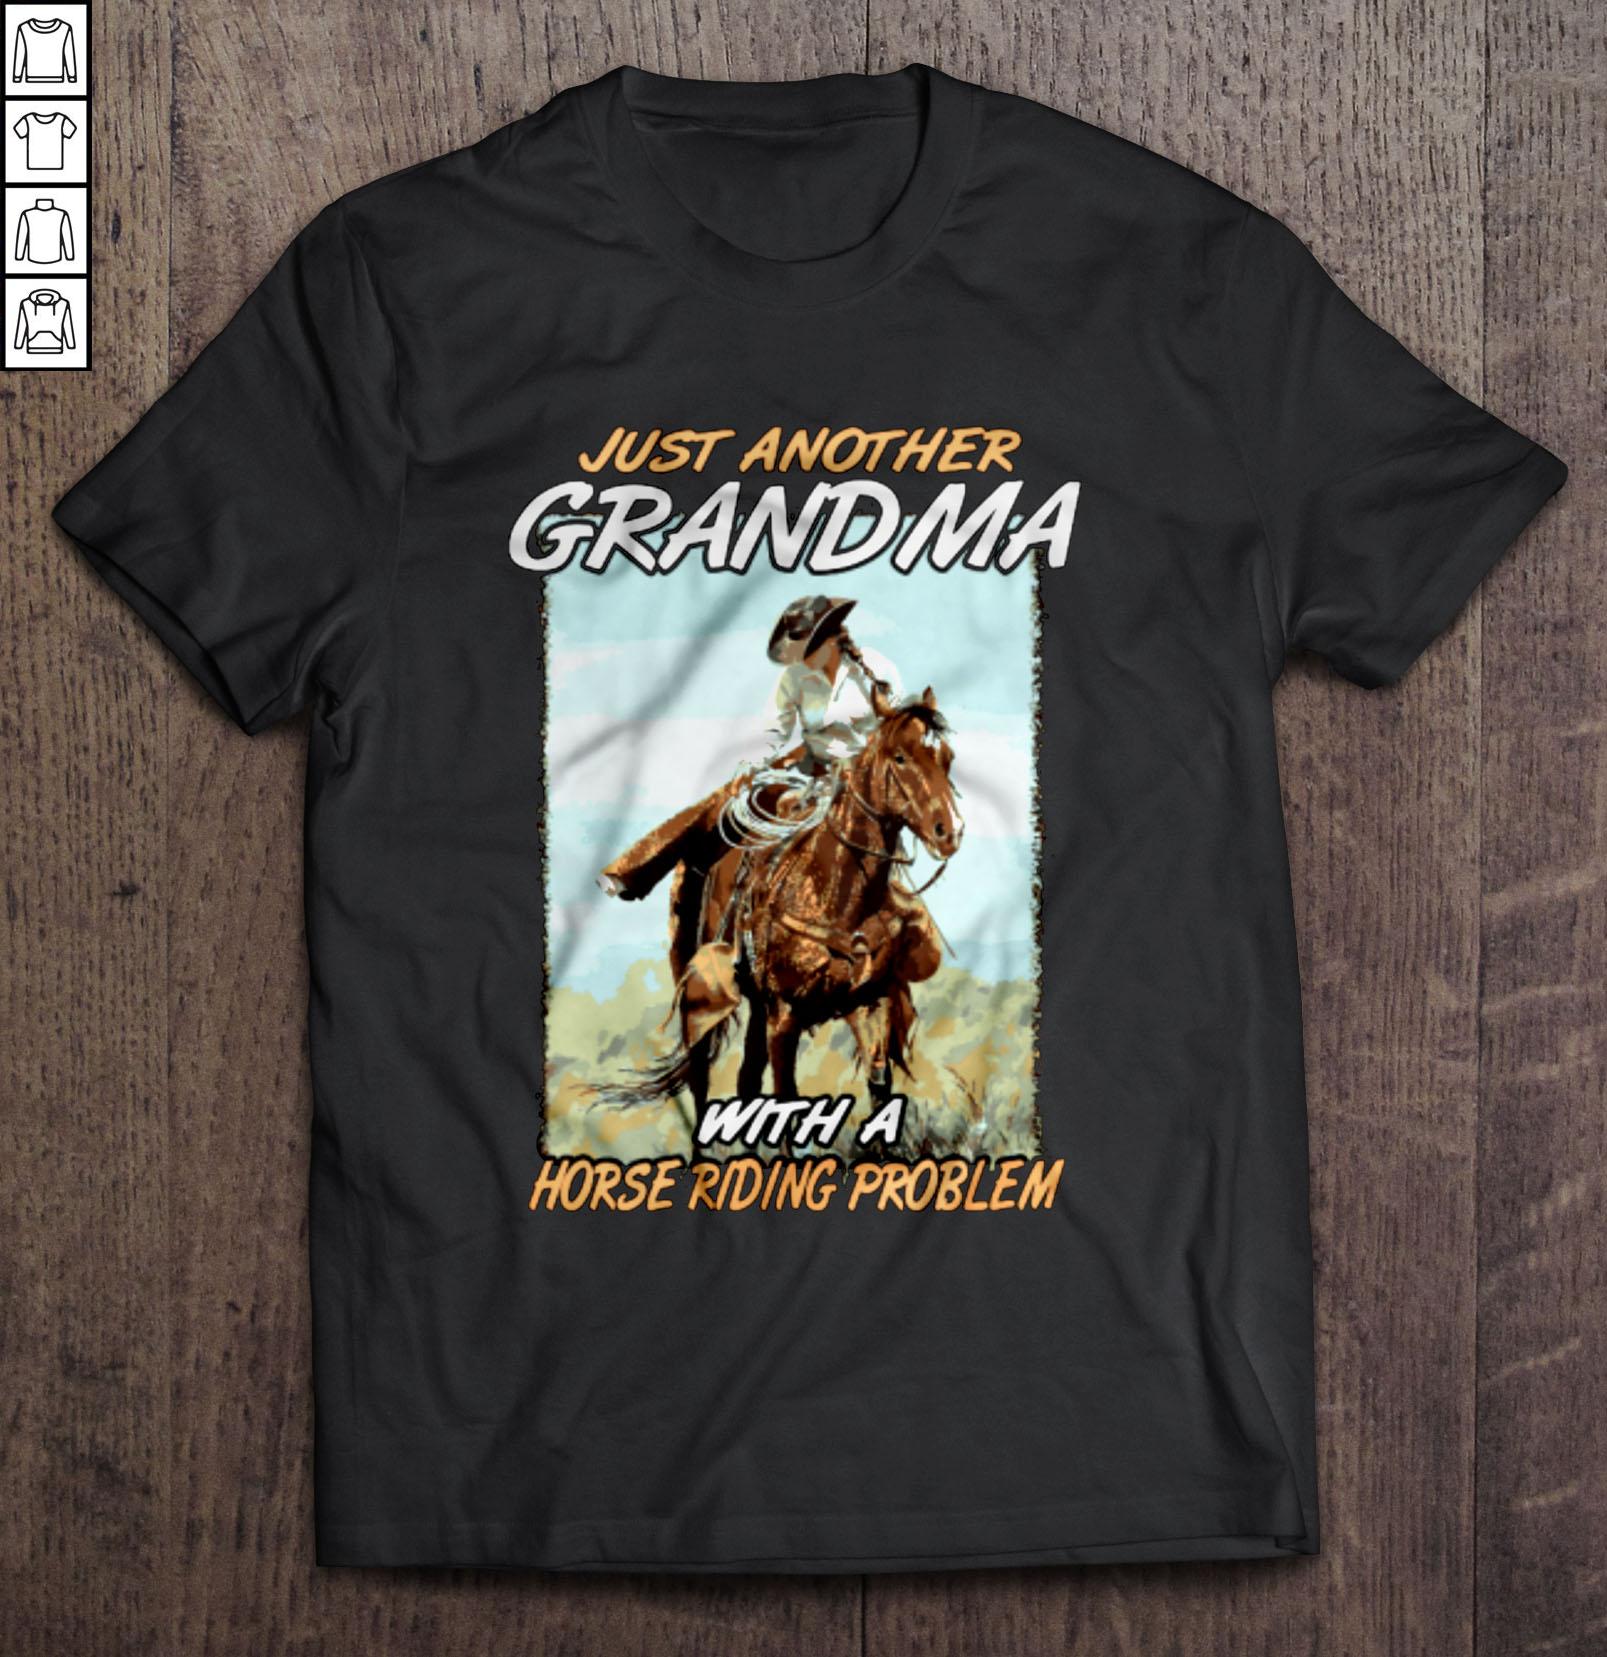 Just another grandma with horse riding problem Shirt